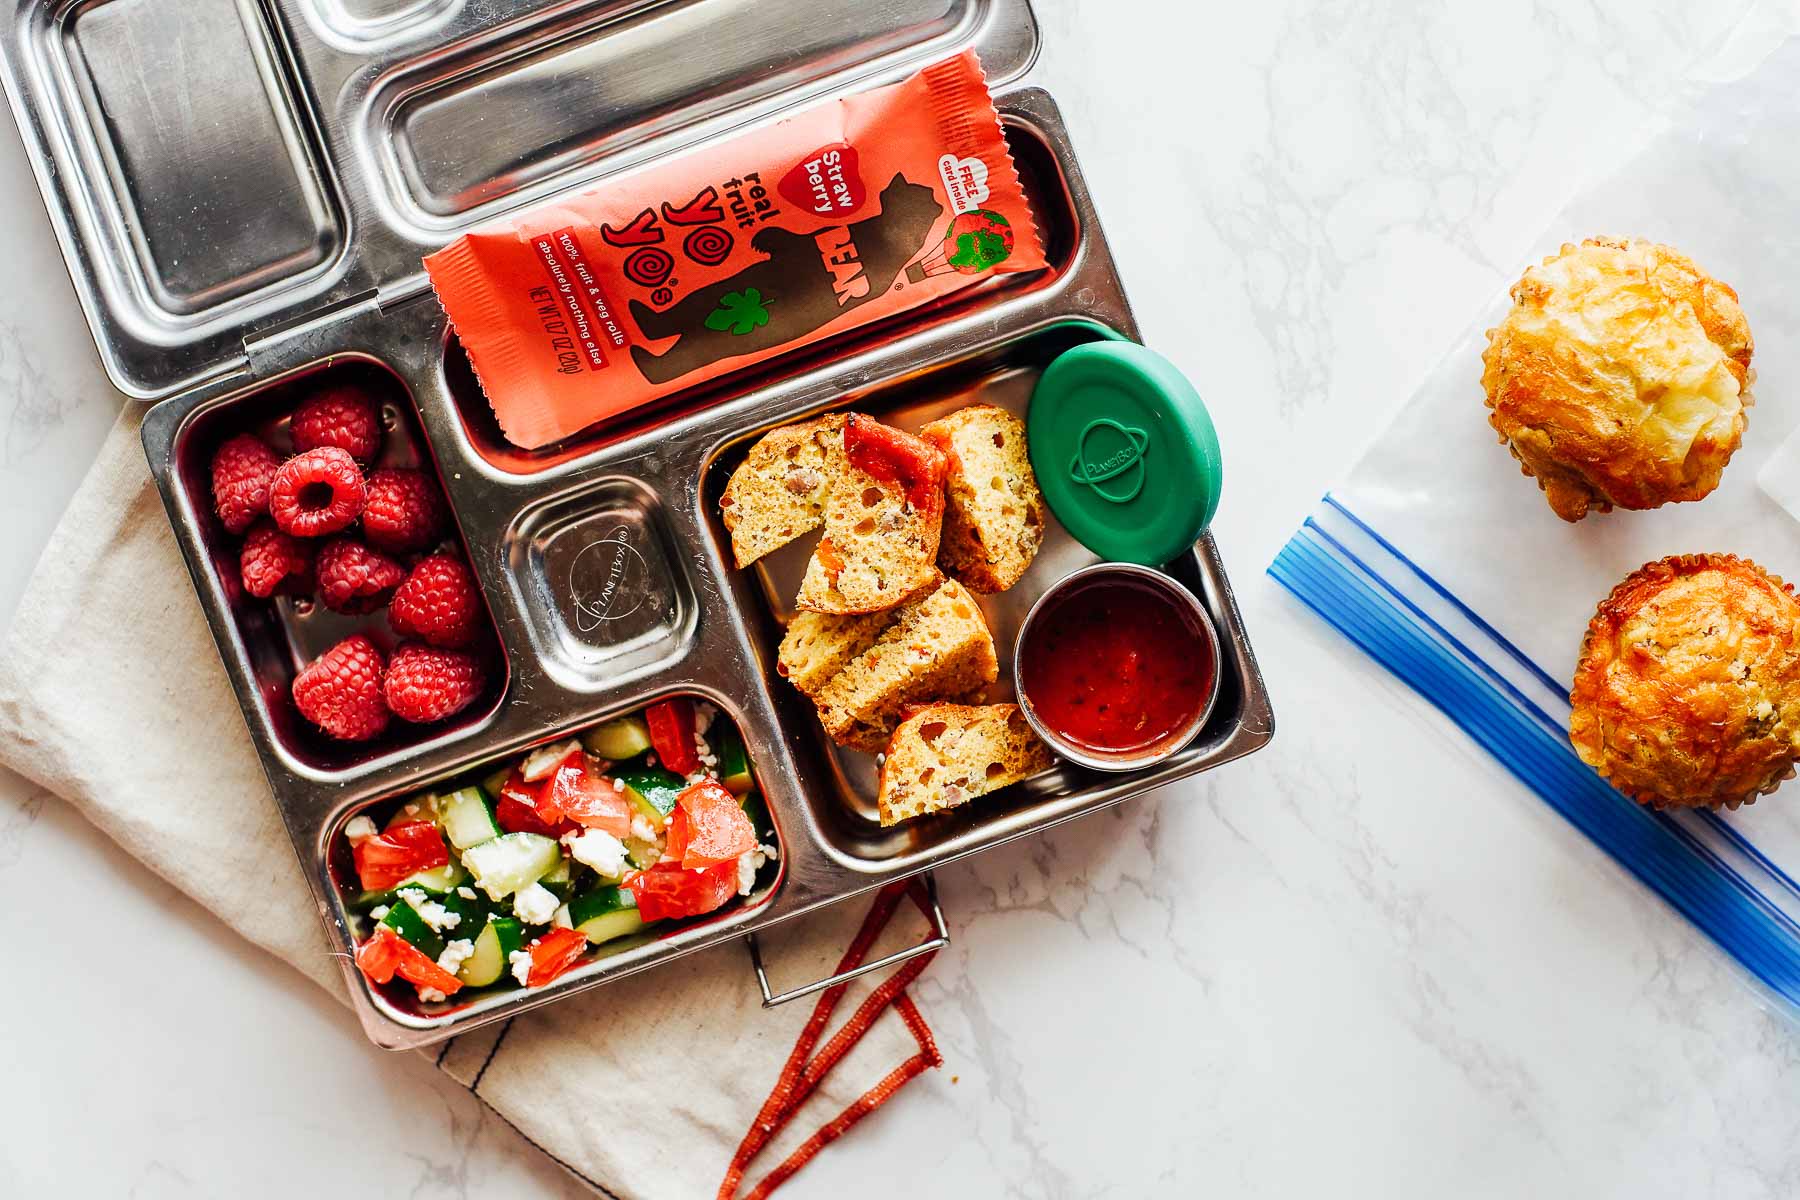 Pizza Muffins with dipping sauce, salad, raspberries, and fruit roll up in a lunchbox.